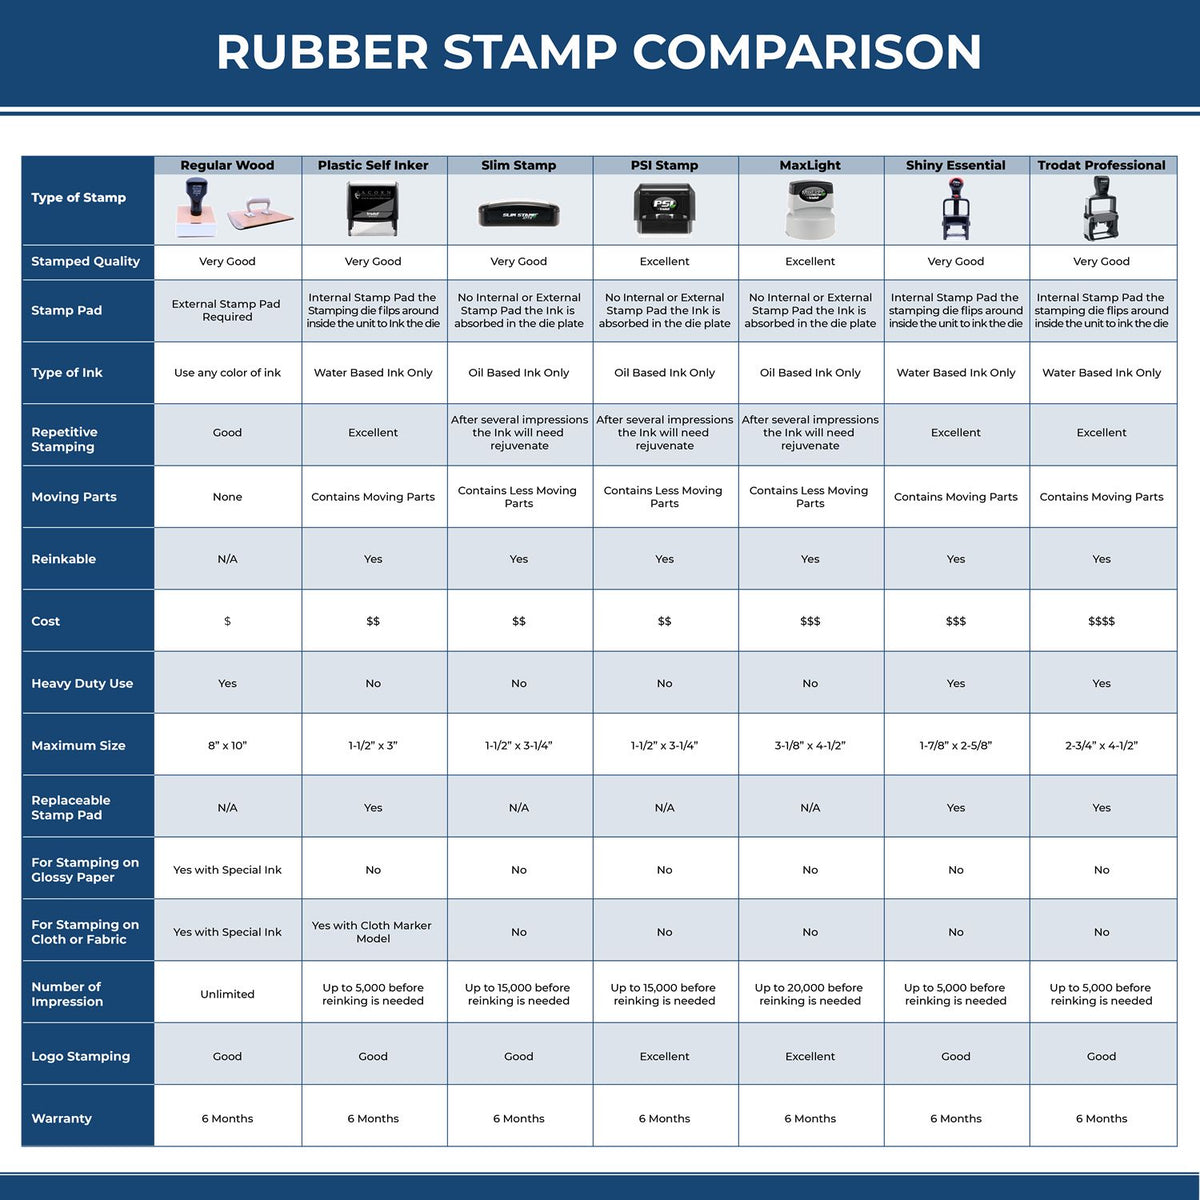 Large Self-Inking Read and Route with Lines Stamp 5634S Rubber Stamp Comparison